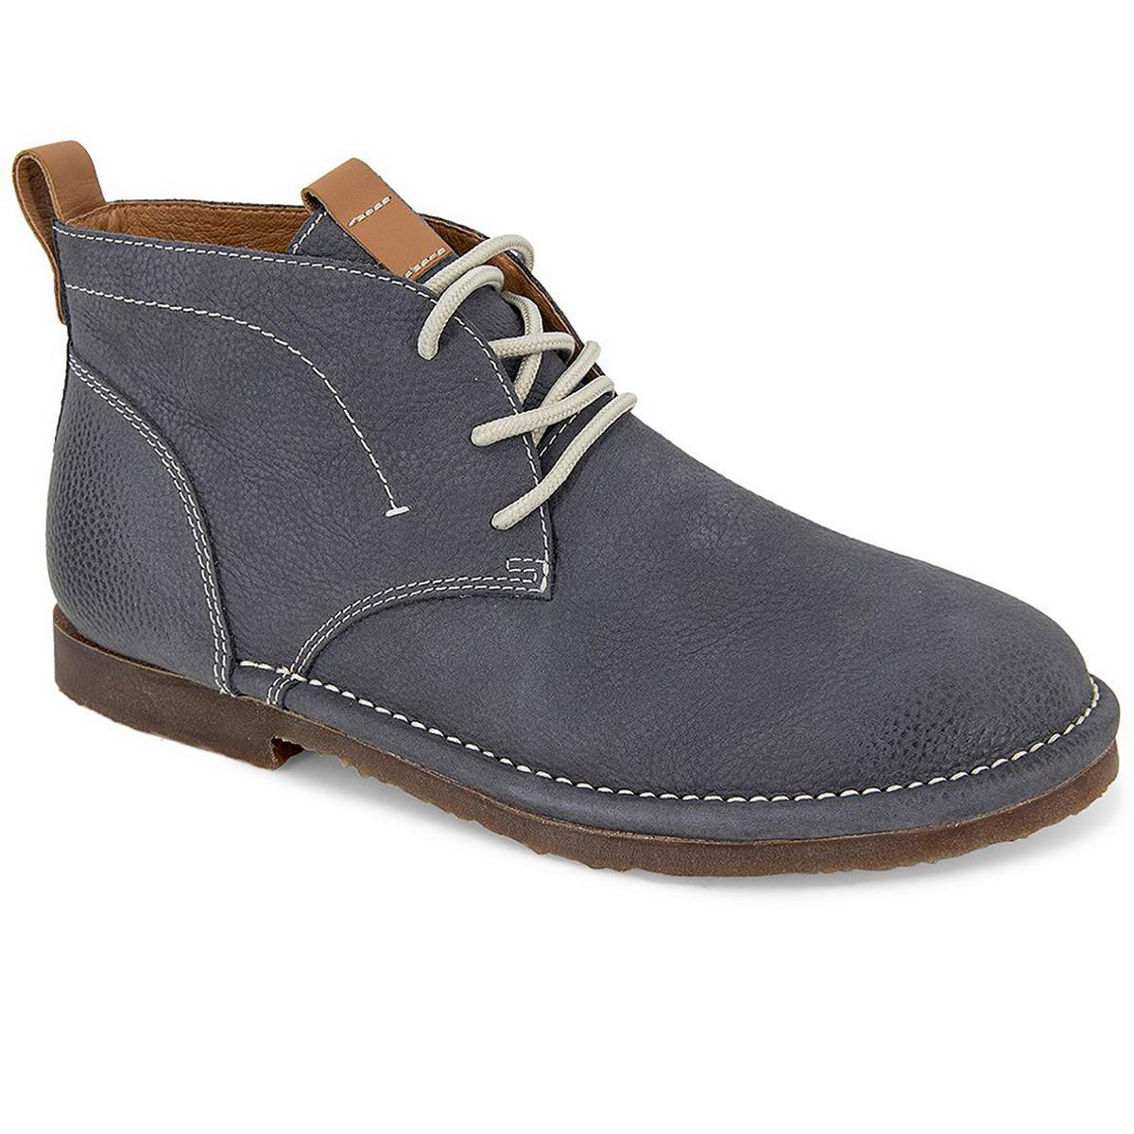 Albert Mens Leather Lace-Up Chukka Boots - Image 4 of 4